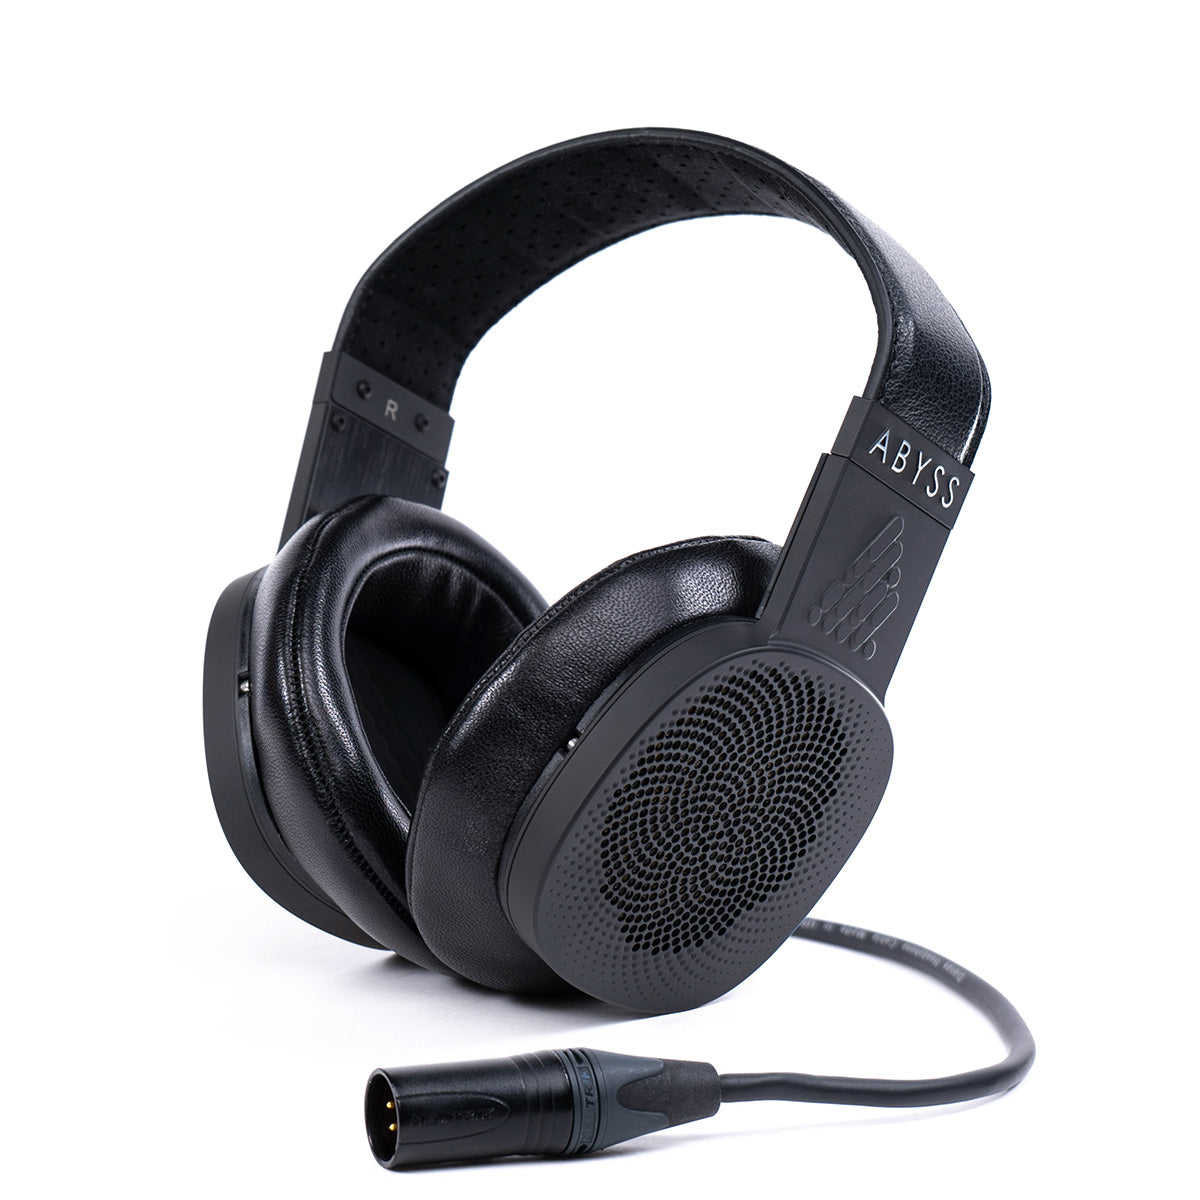 SALE! DIANA V2 Luxury Headphones by ABYSS- Found In Warehouse Sale!